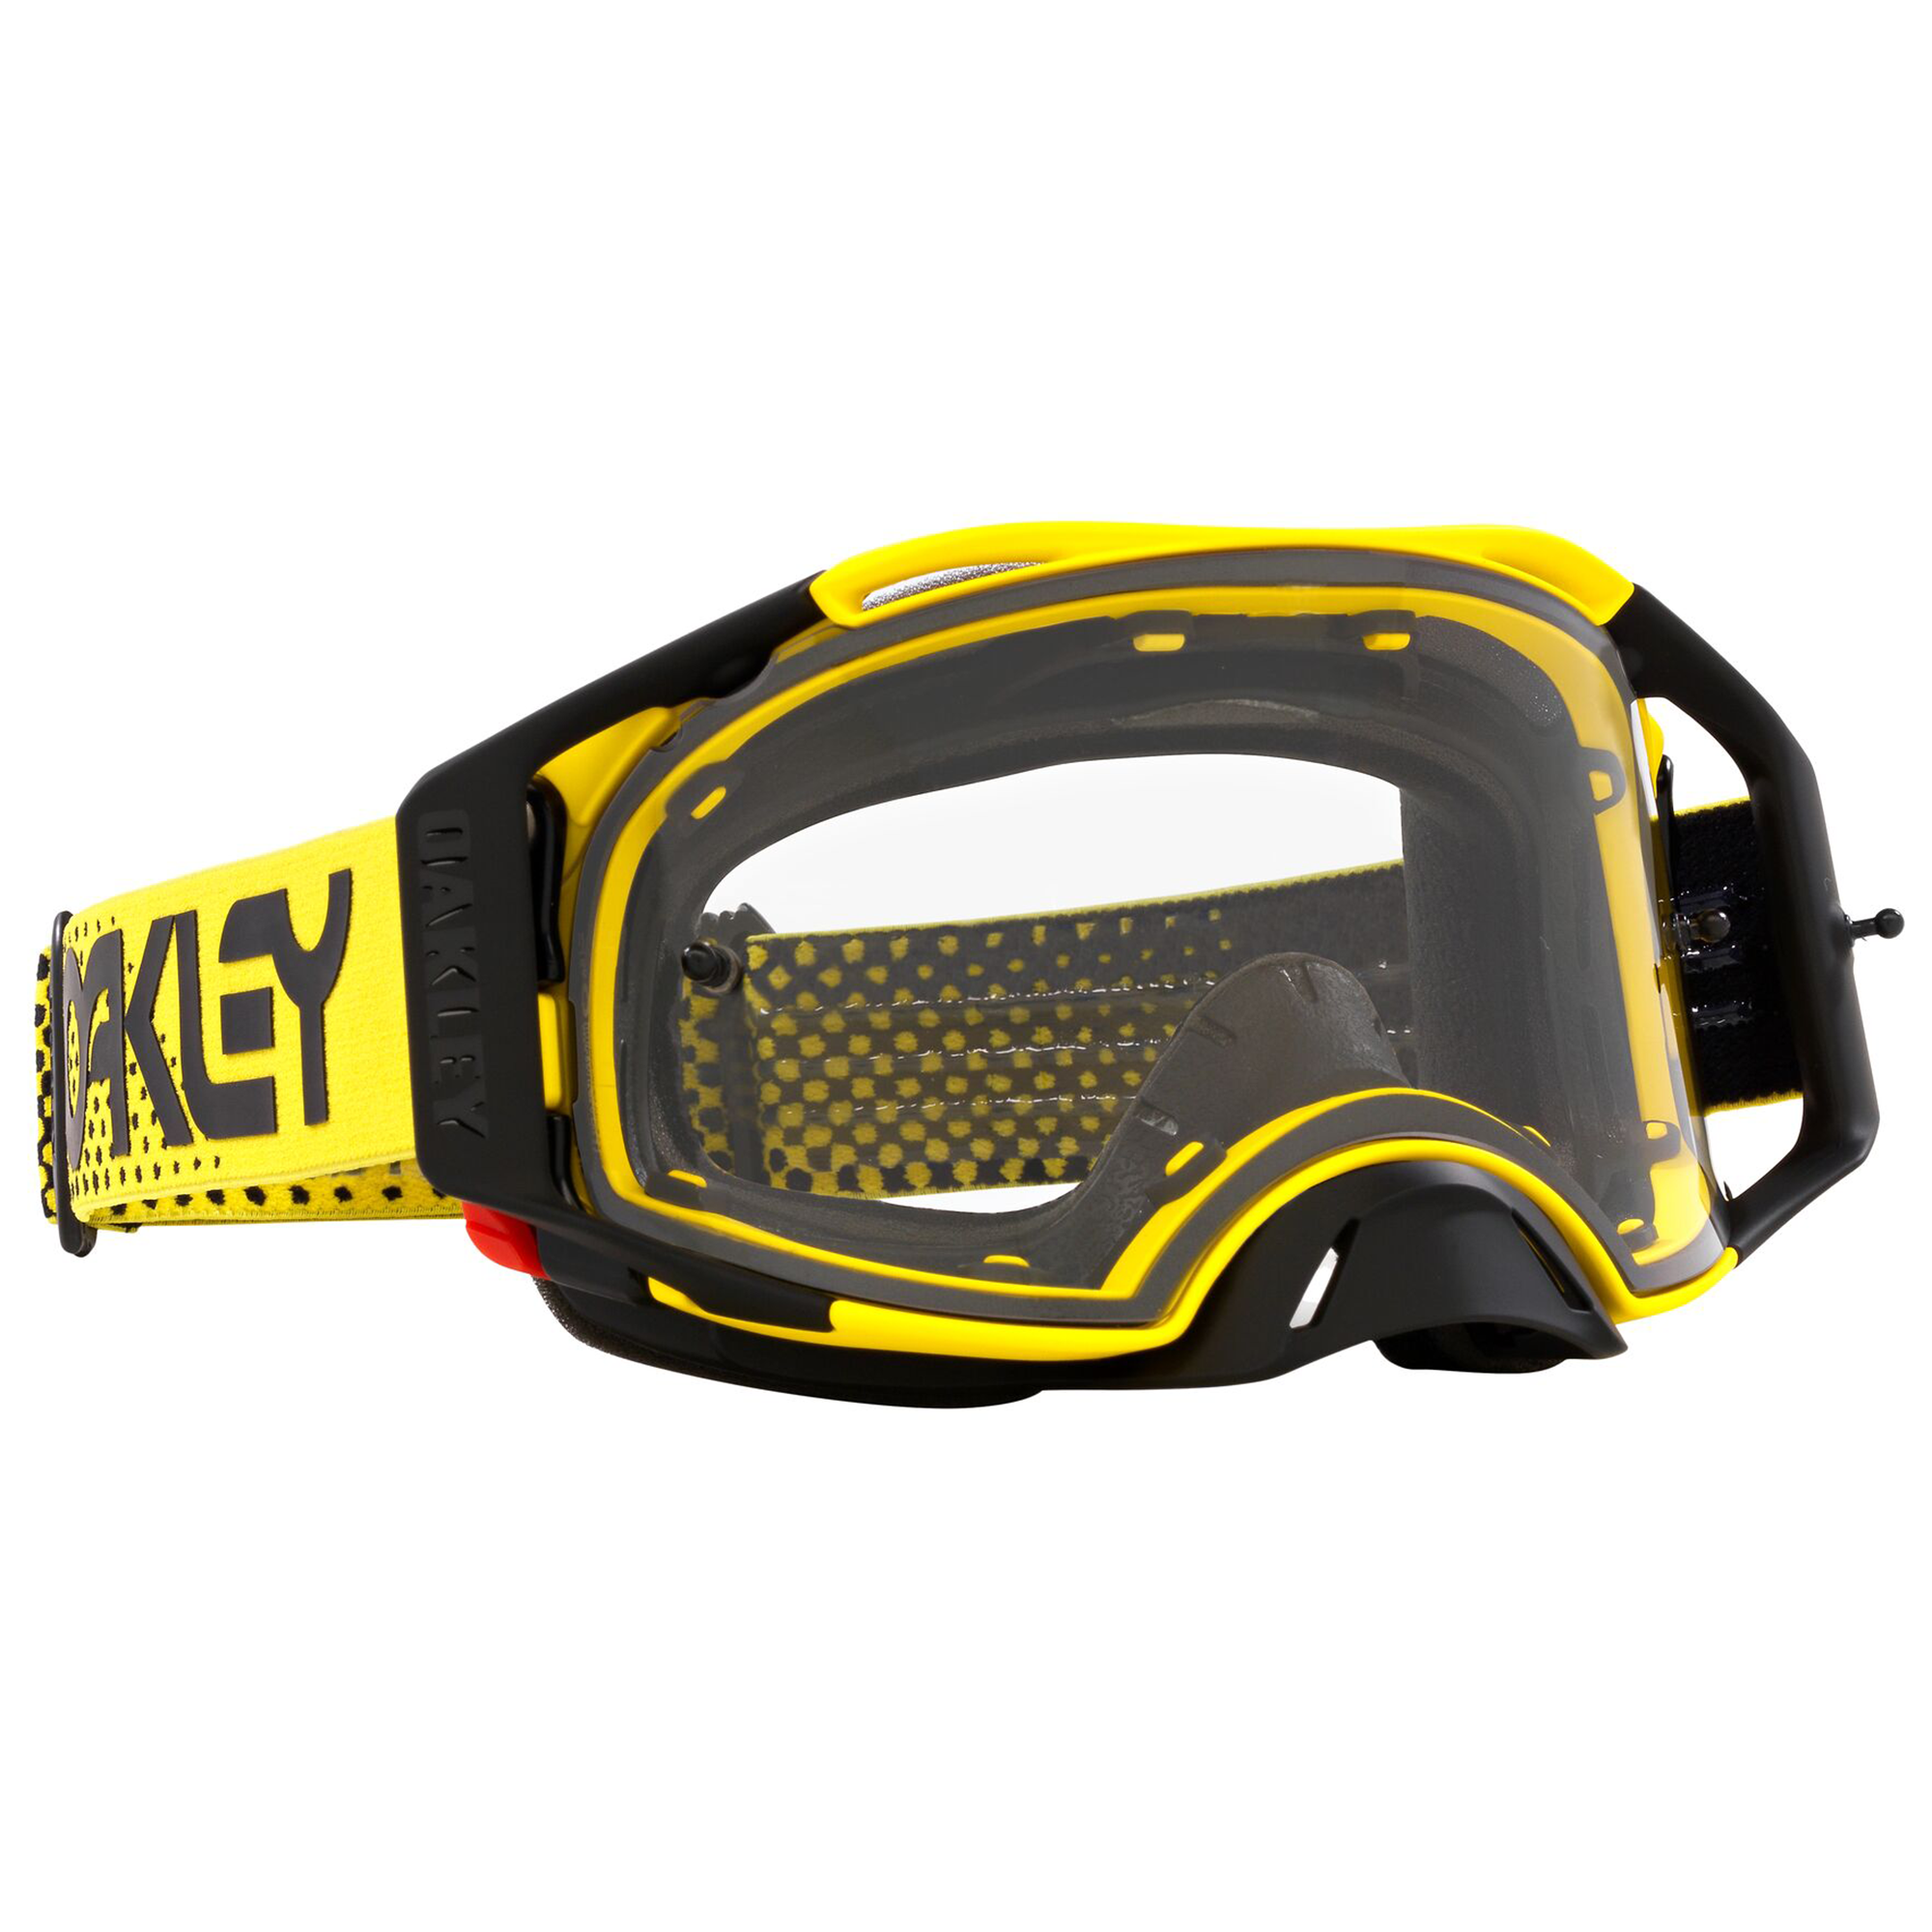 Oakley Airbrake MX Goggle in Moto Yellow with Clear Lens on White Background